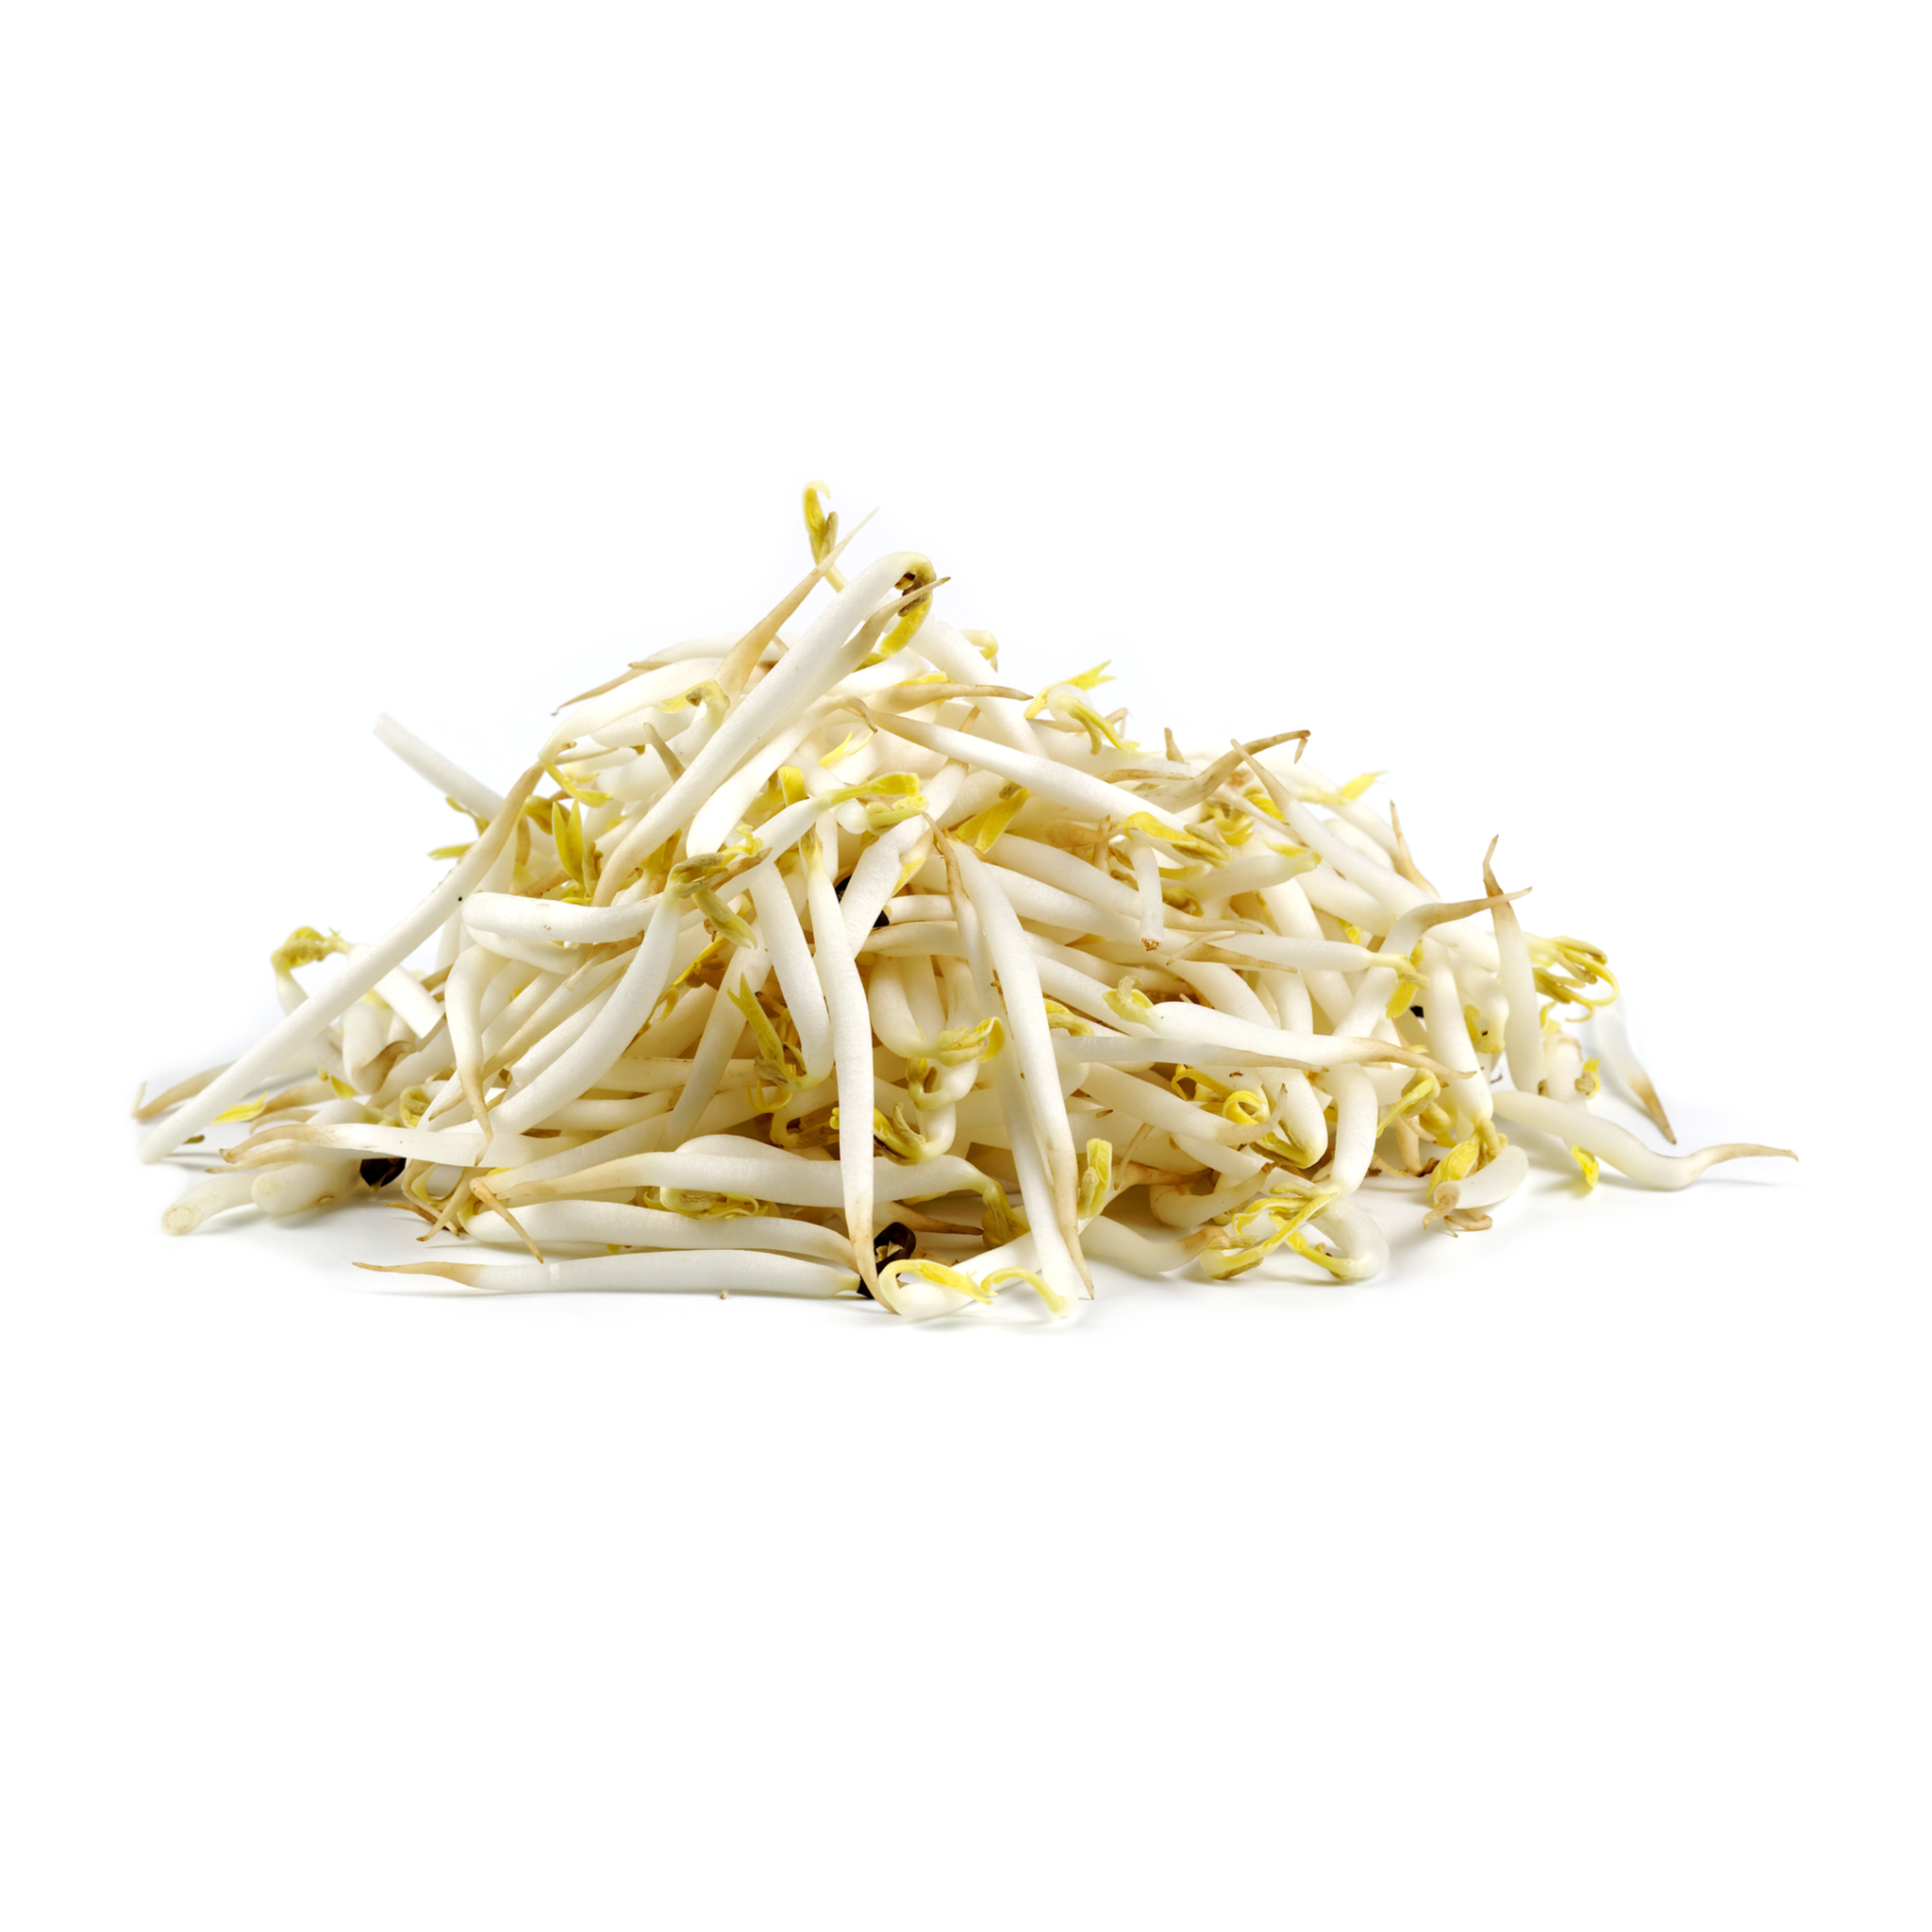 Fresh Beansprouts about 100g - Imported Weekly from Asia